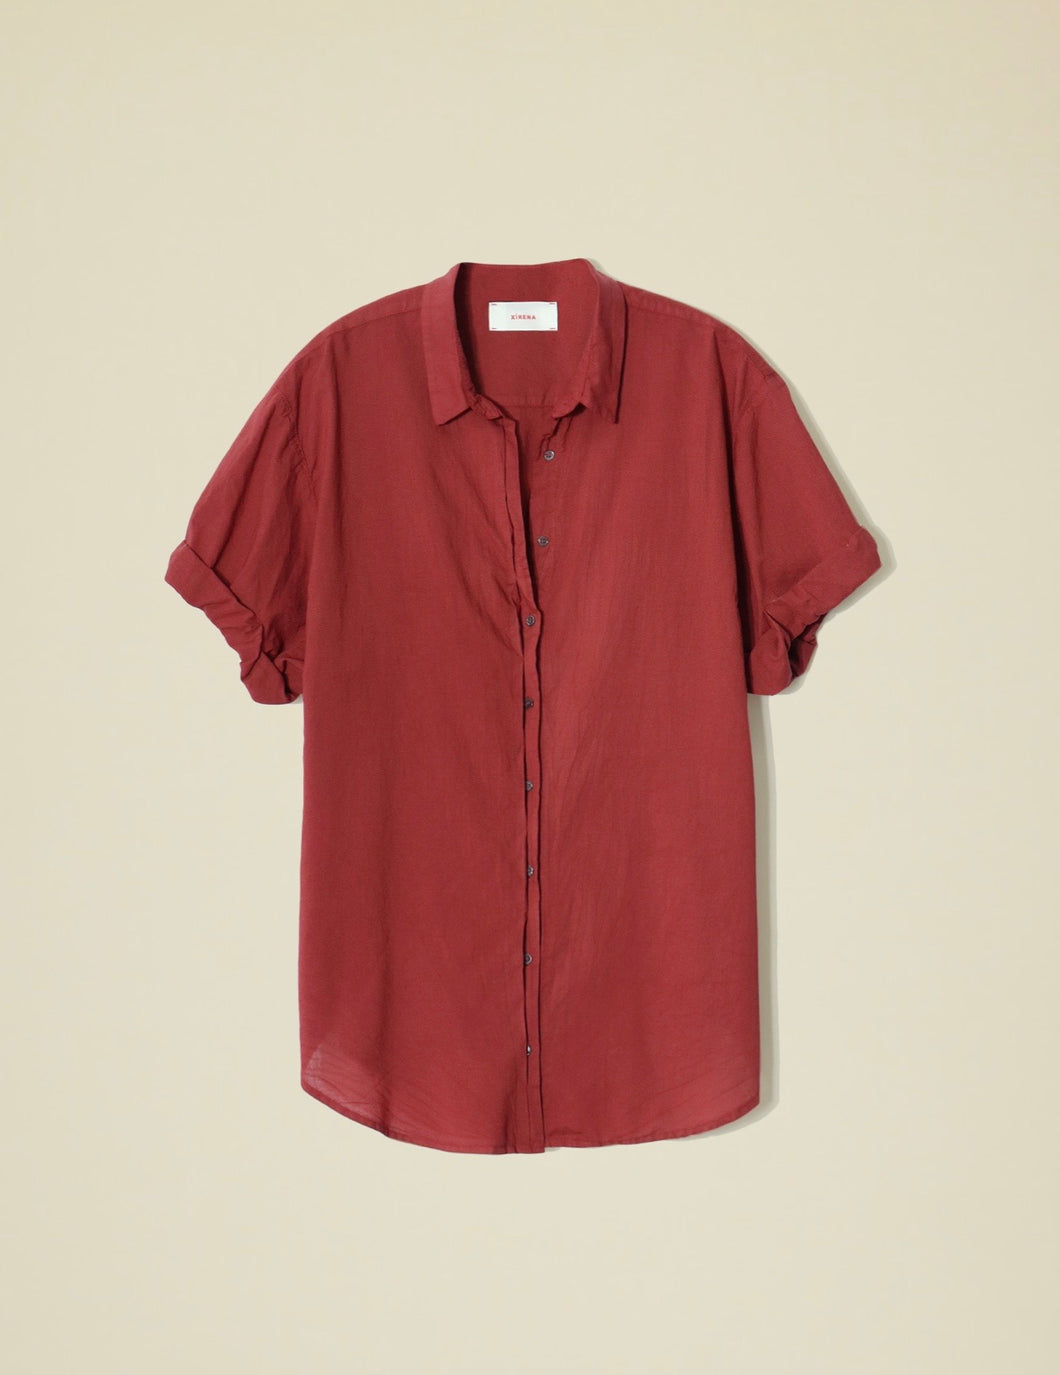 Channing Shirt in Brick Red